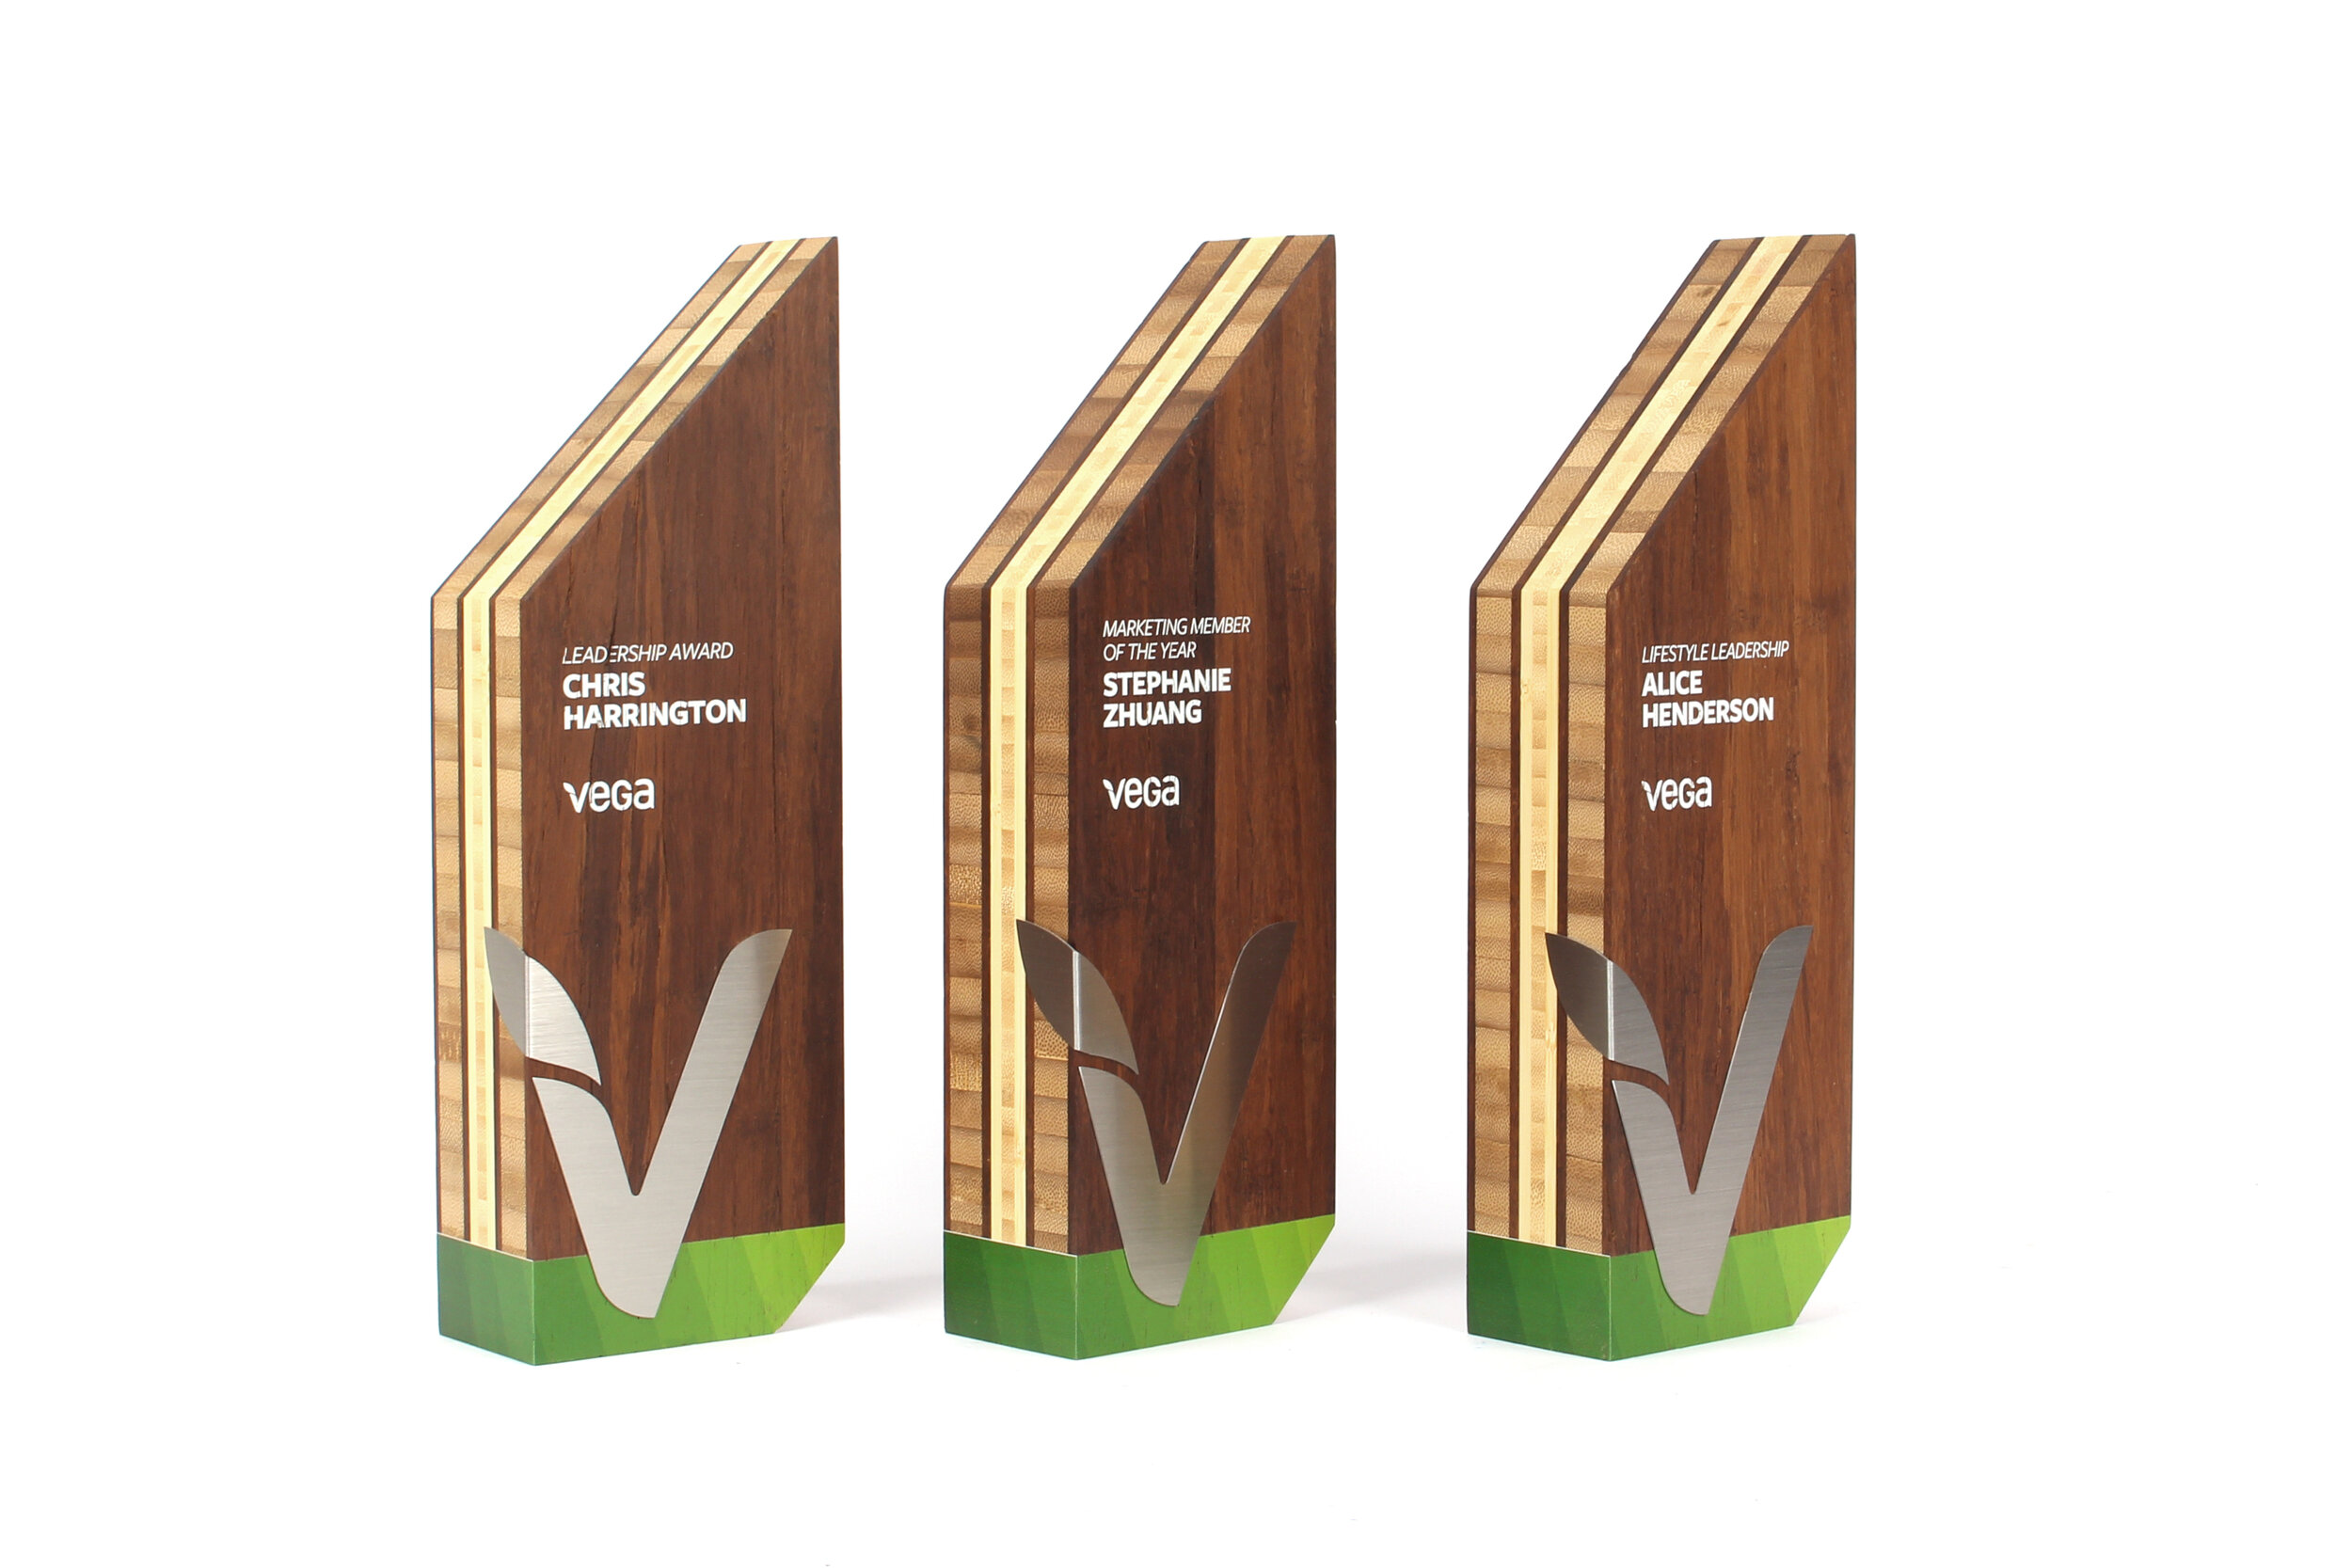 VEGA custom marketing and leadership awards for a corporate event conference bamboo sustainable awards 7